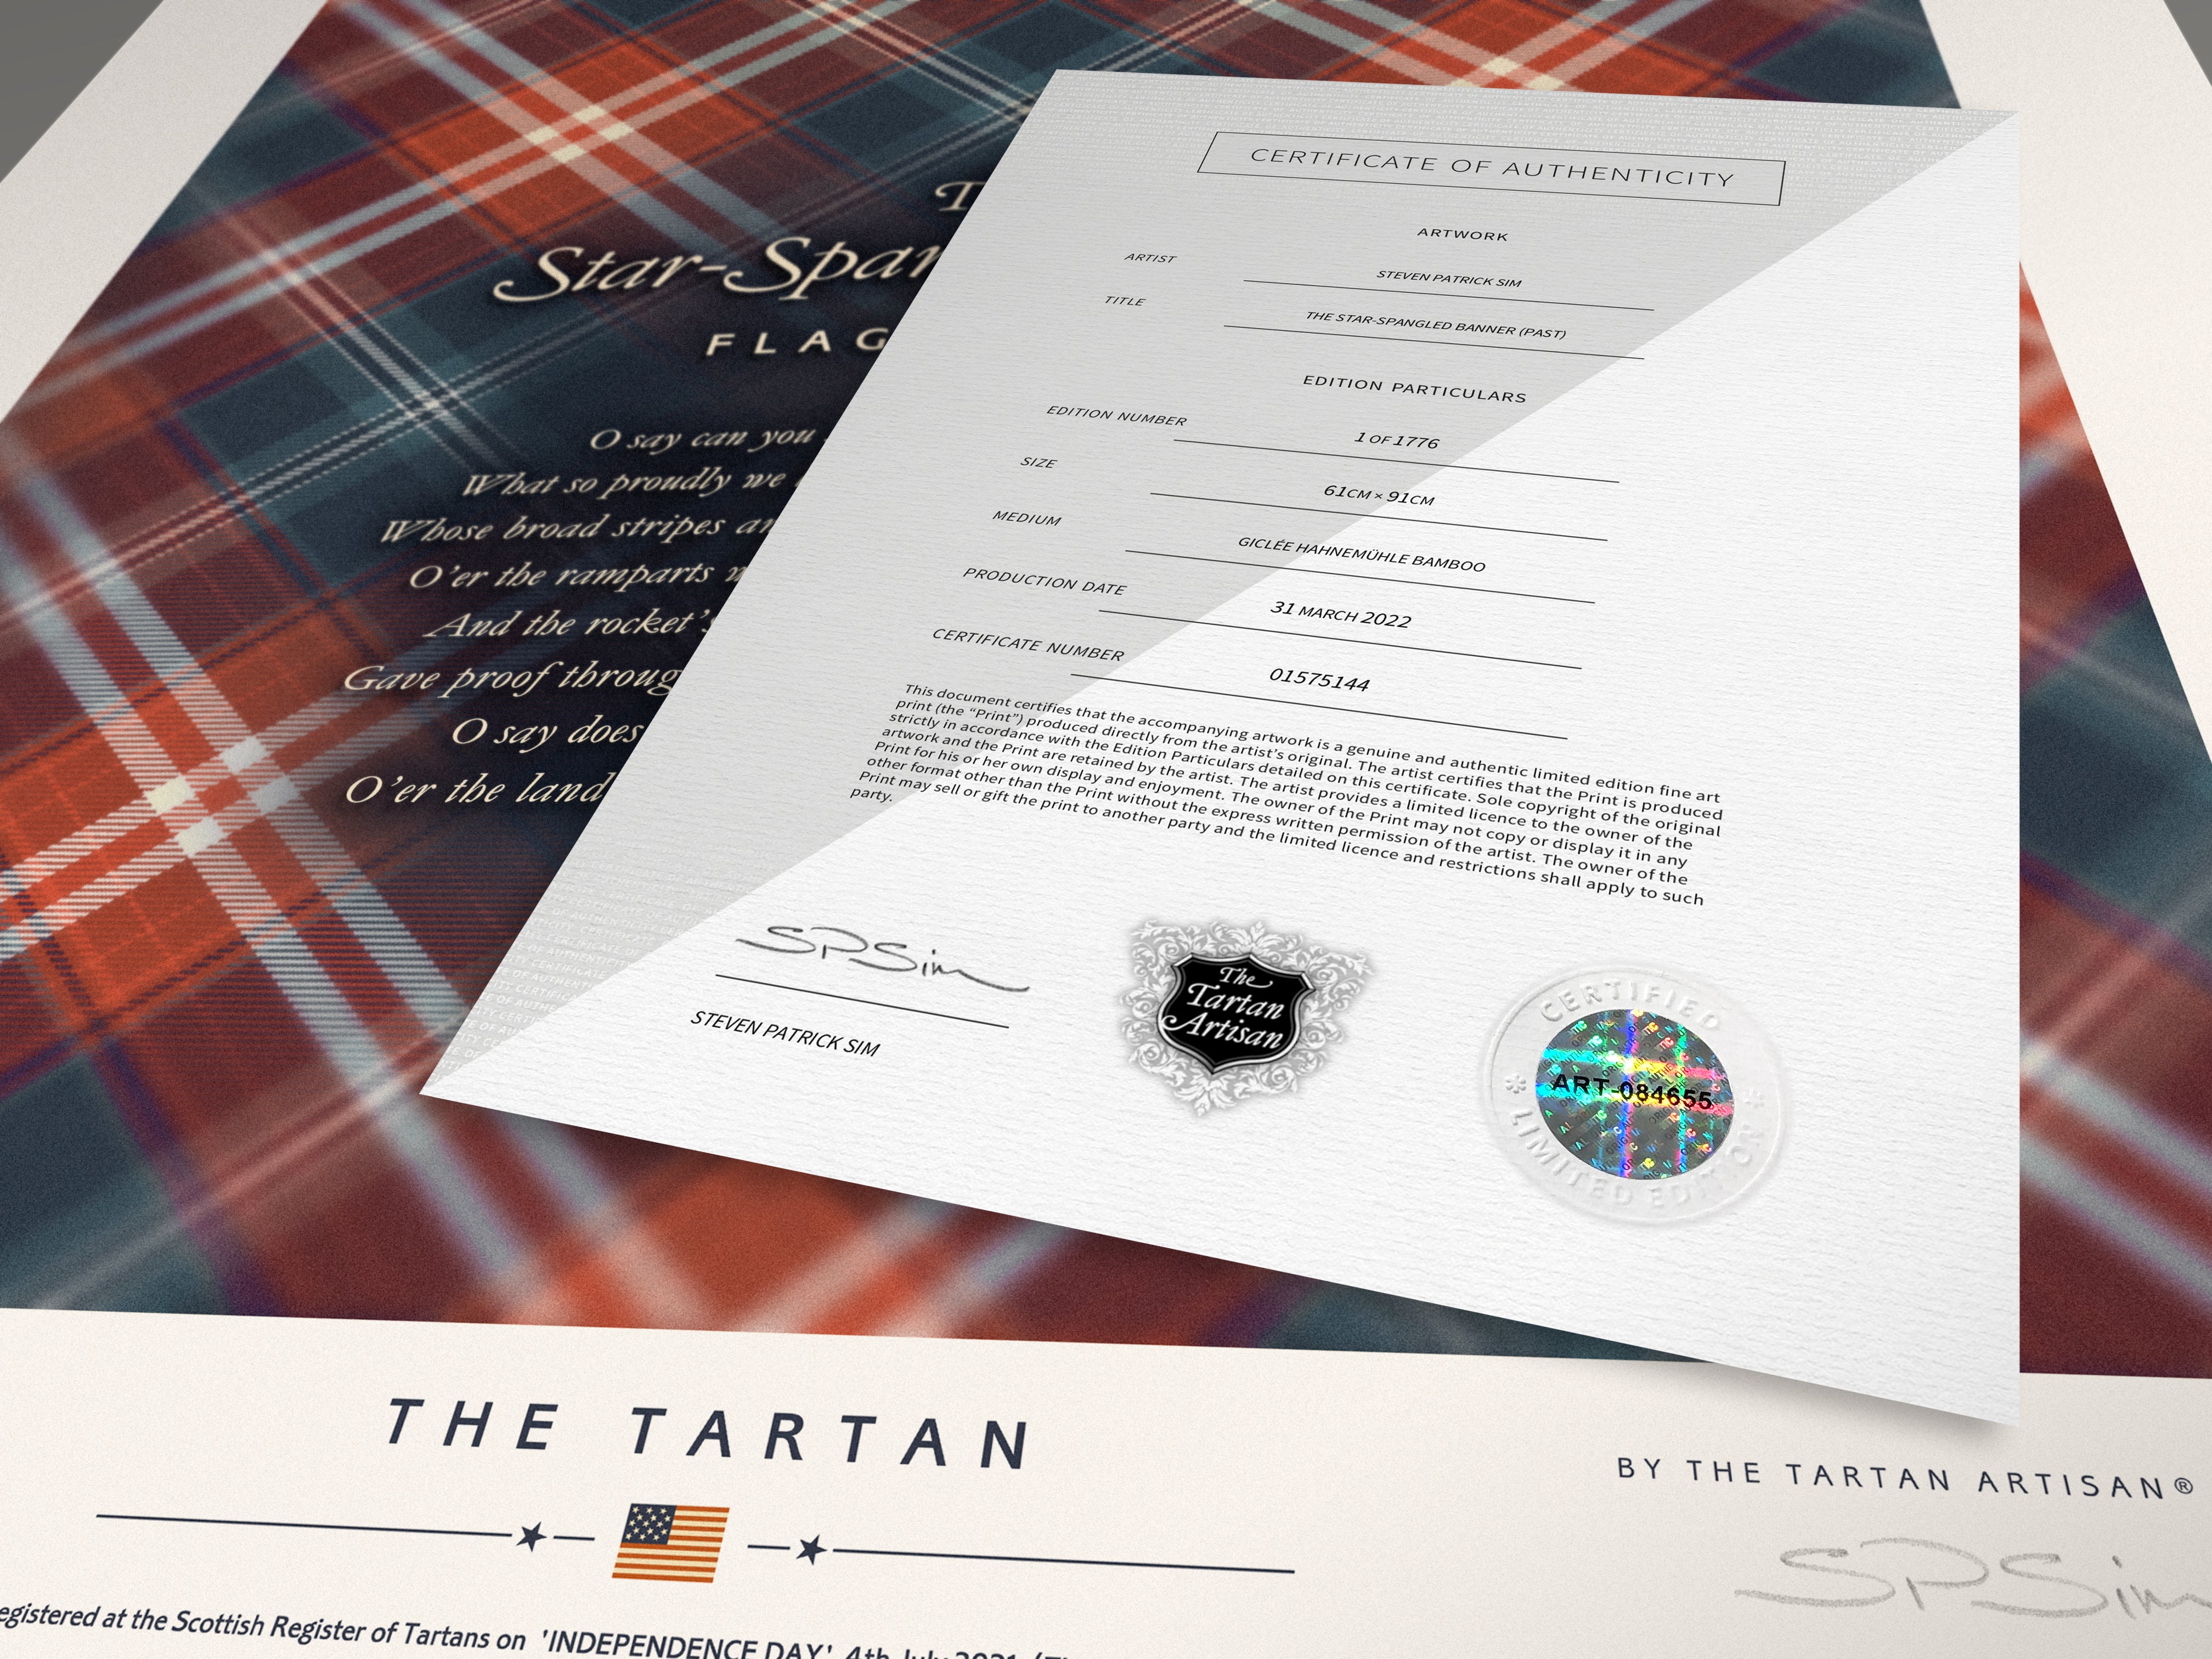 The Star-Spangled Banner Fine Art Limited Edition Tartan Print - 1776 giclée copies - PAST